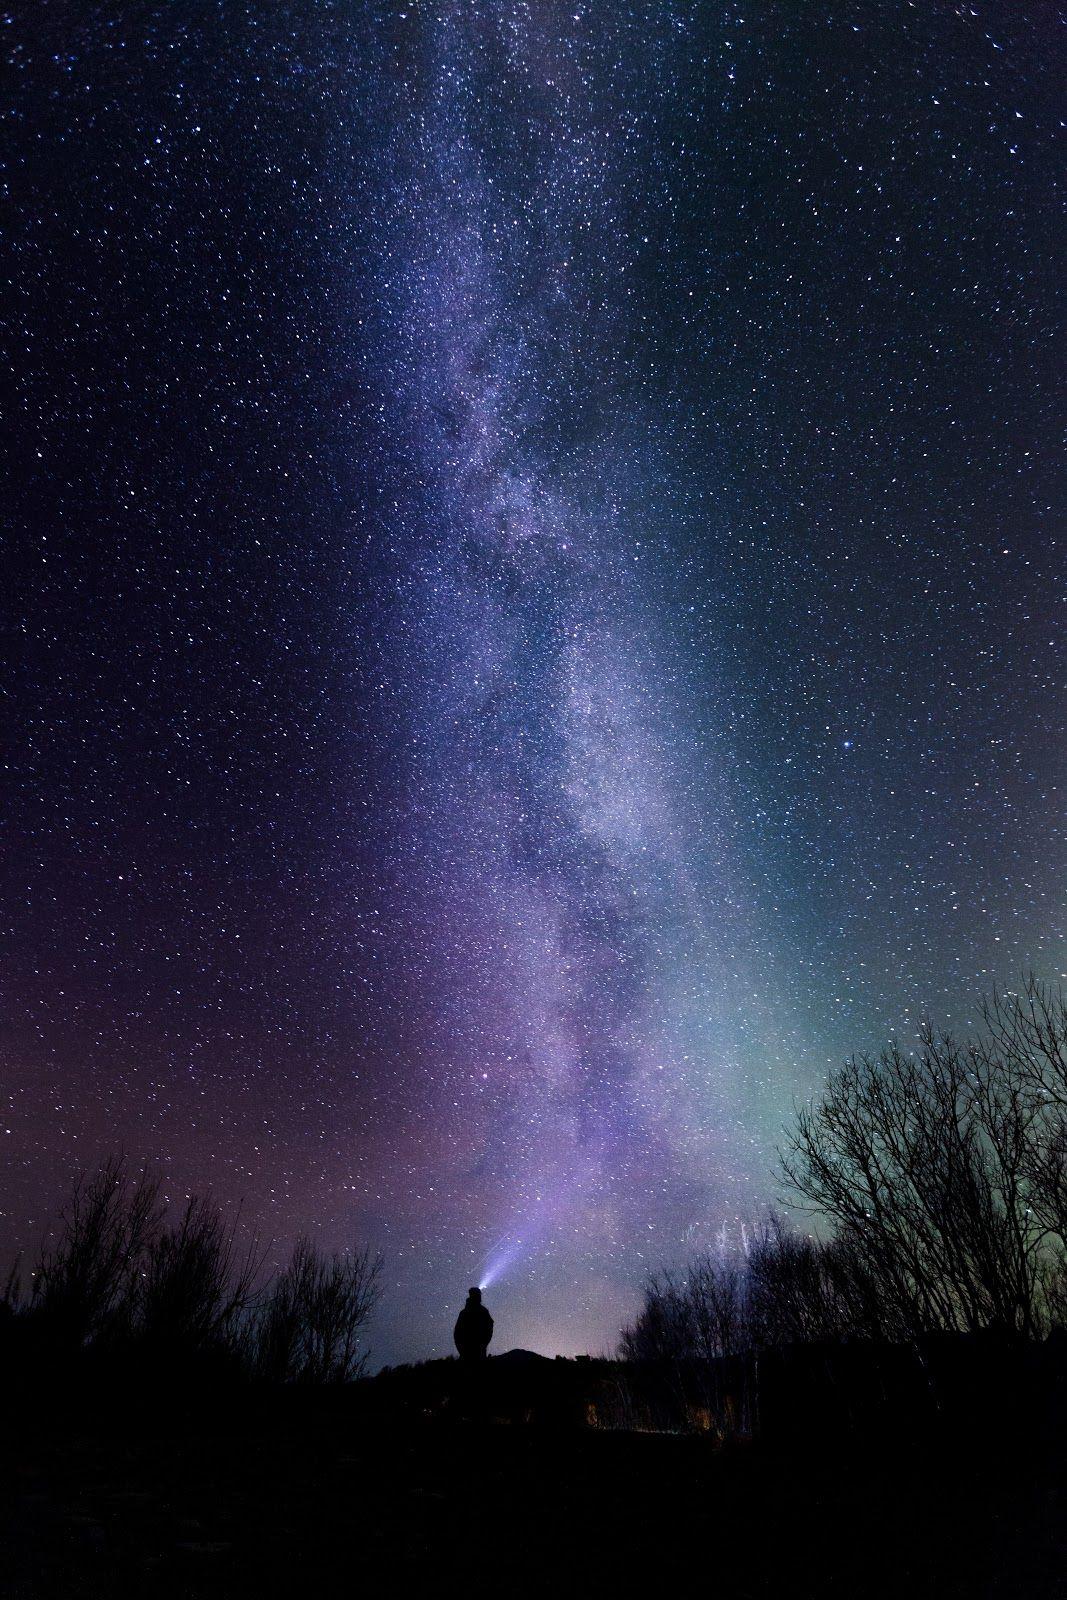 Silhouette Photography Of Person Under Starry Sky. Silhouette